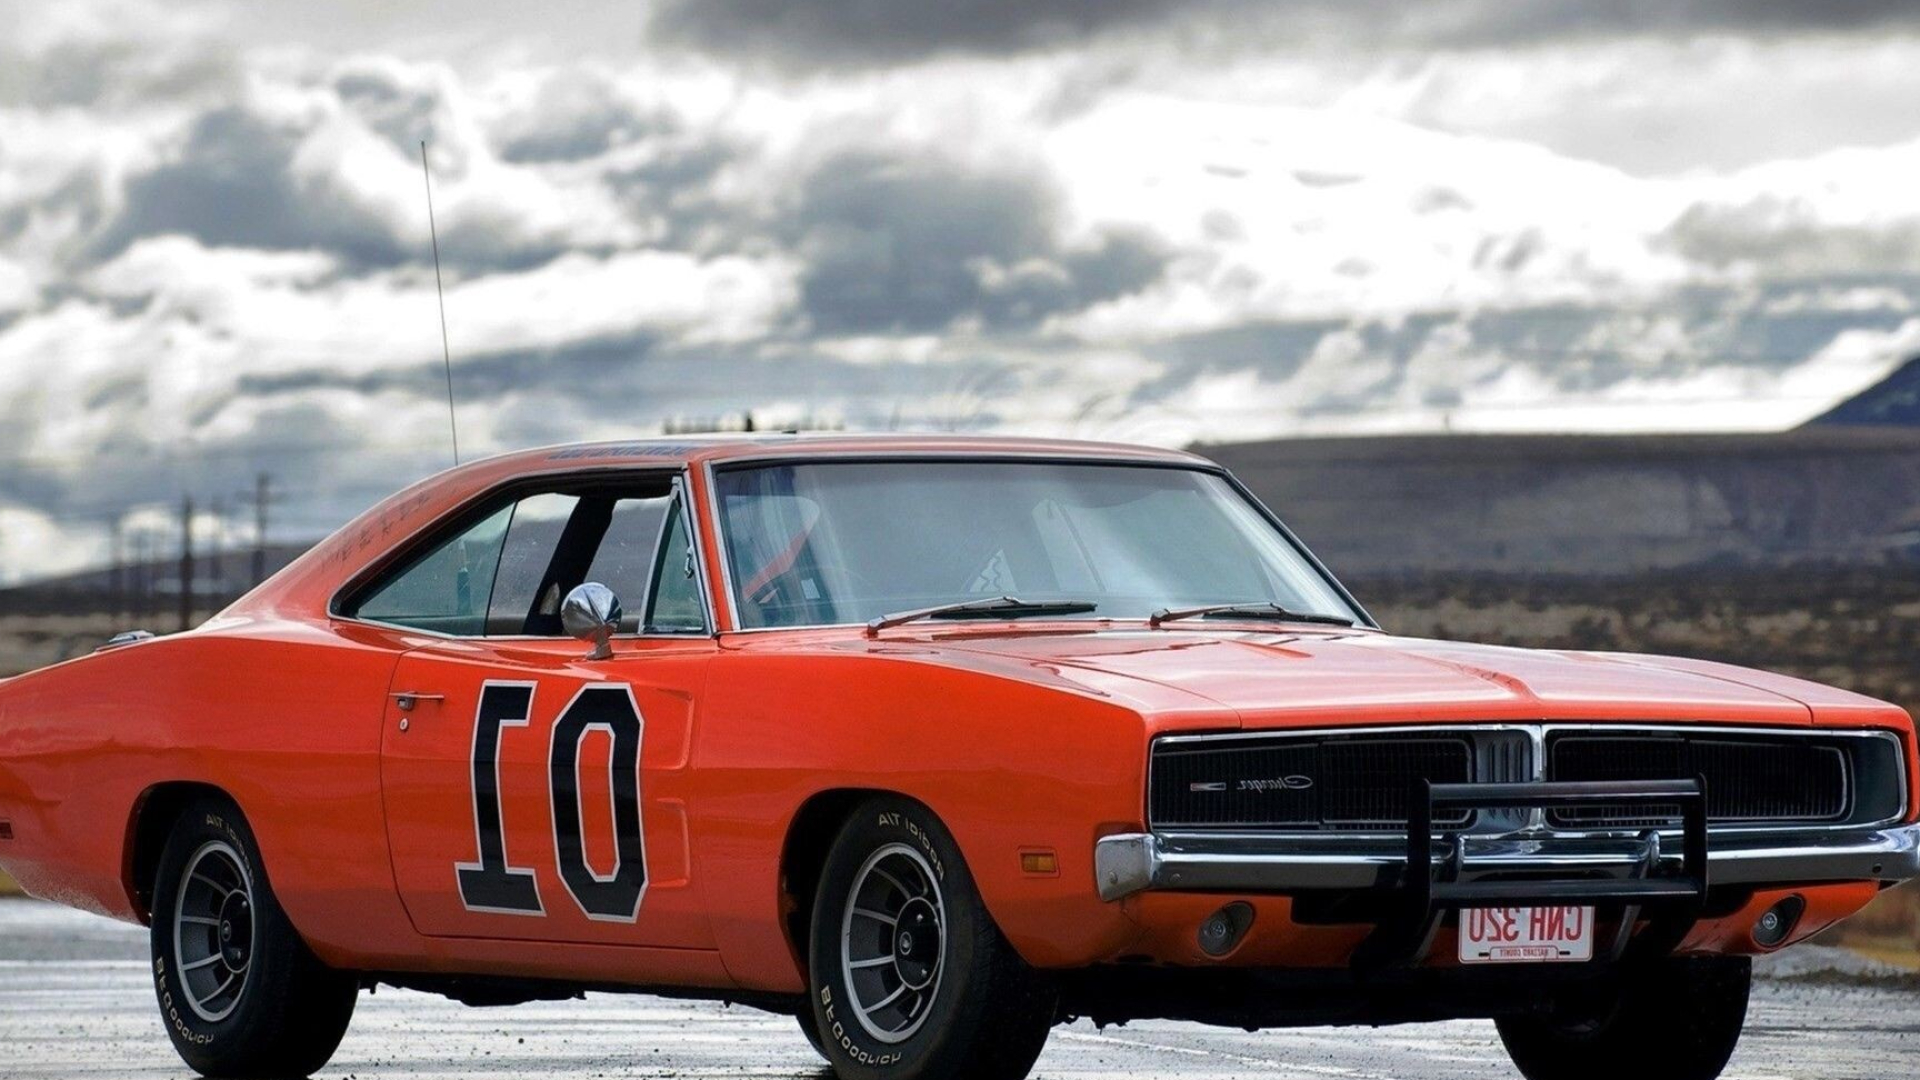 General Lee Car: Autographed General Lee tribute Charger, Red CNH320 license plate, “California Era”, Featuring: Hazzard County. 1920x1080 Full HD Wallpaper.